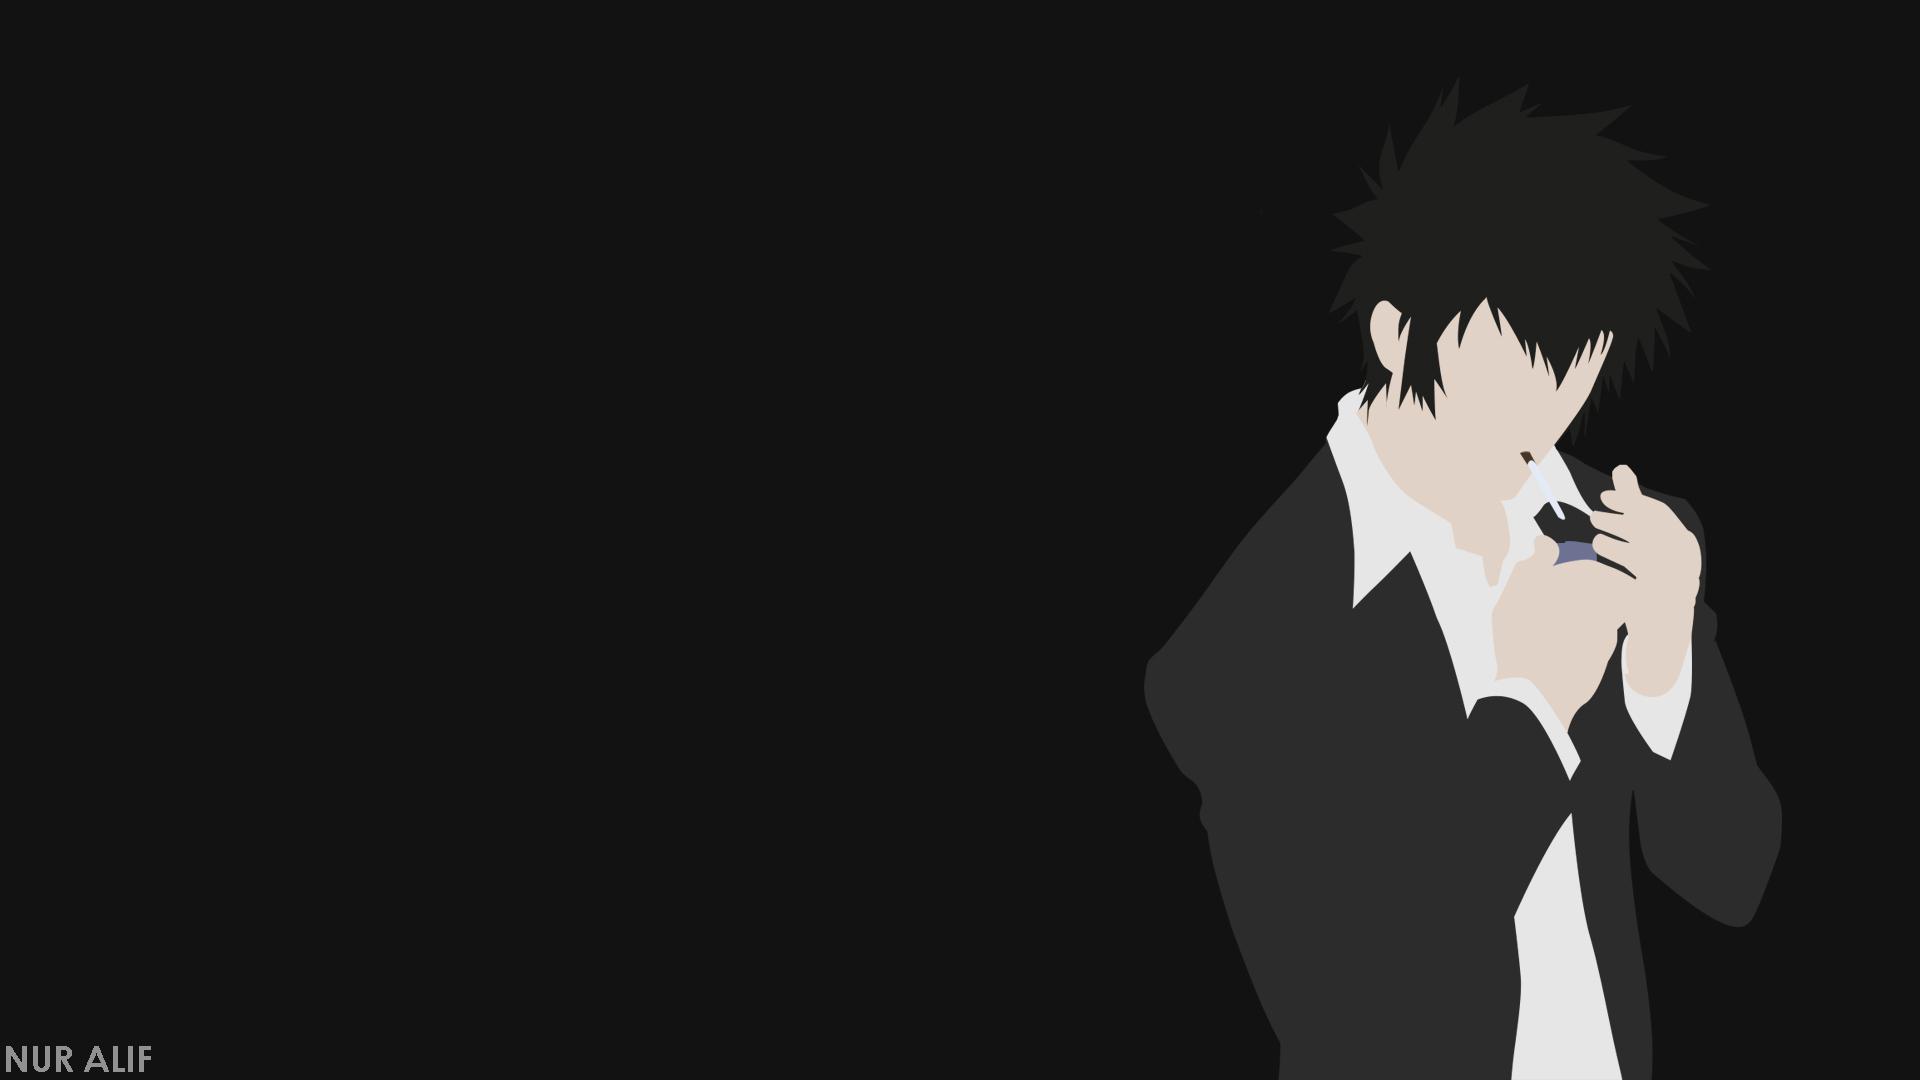 20 Minimalist Anime Wallpapers for iPhone and Android by Arthur Thomas